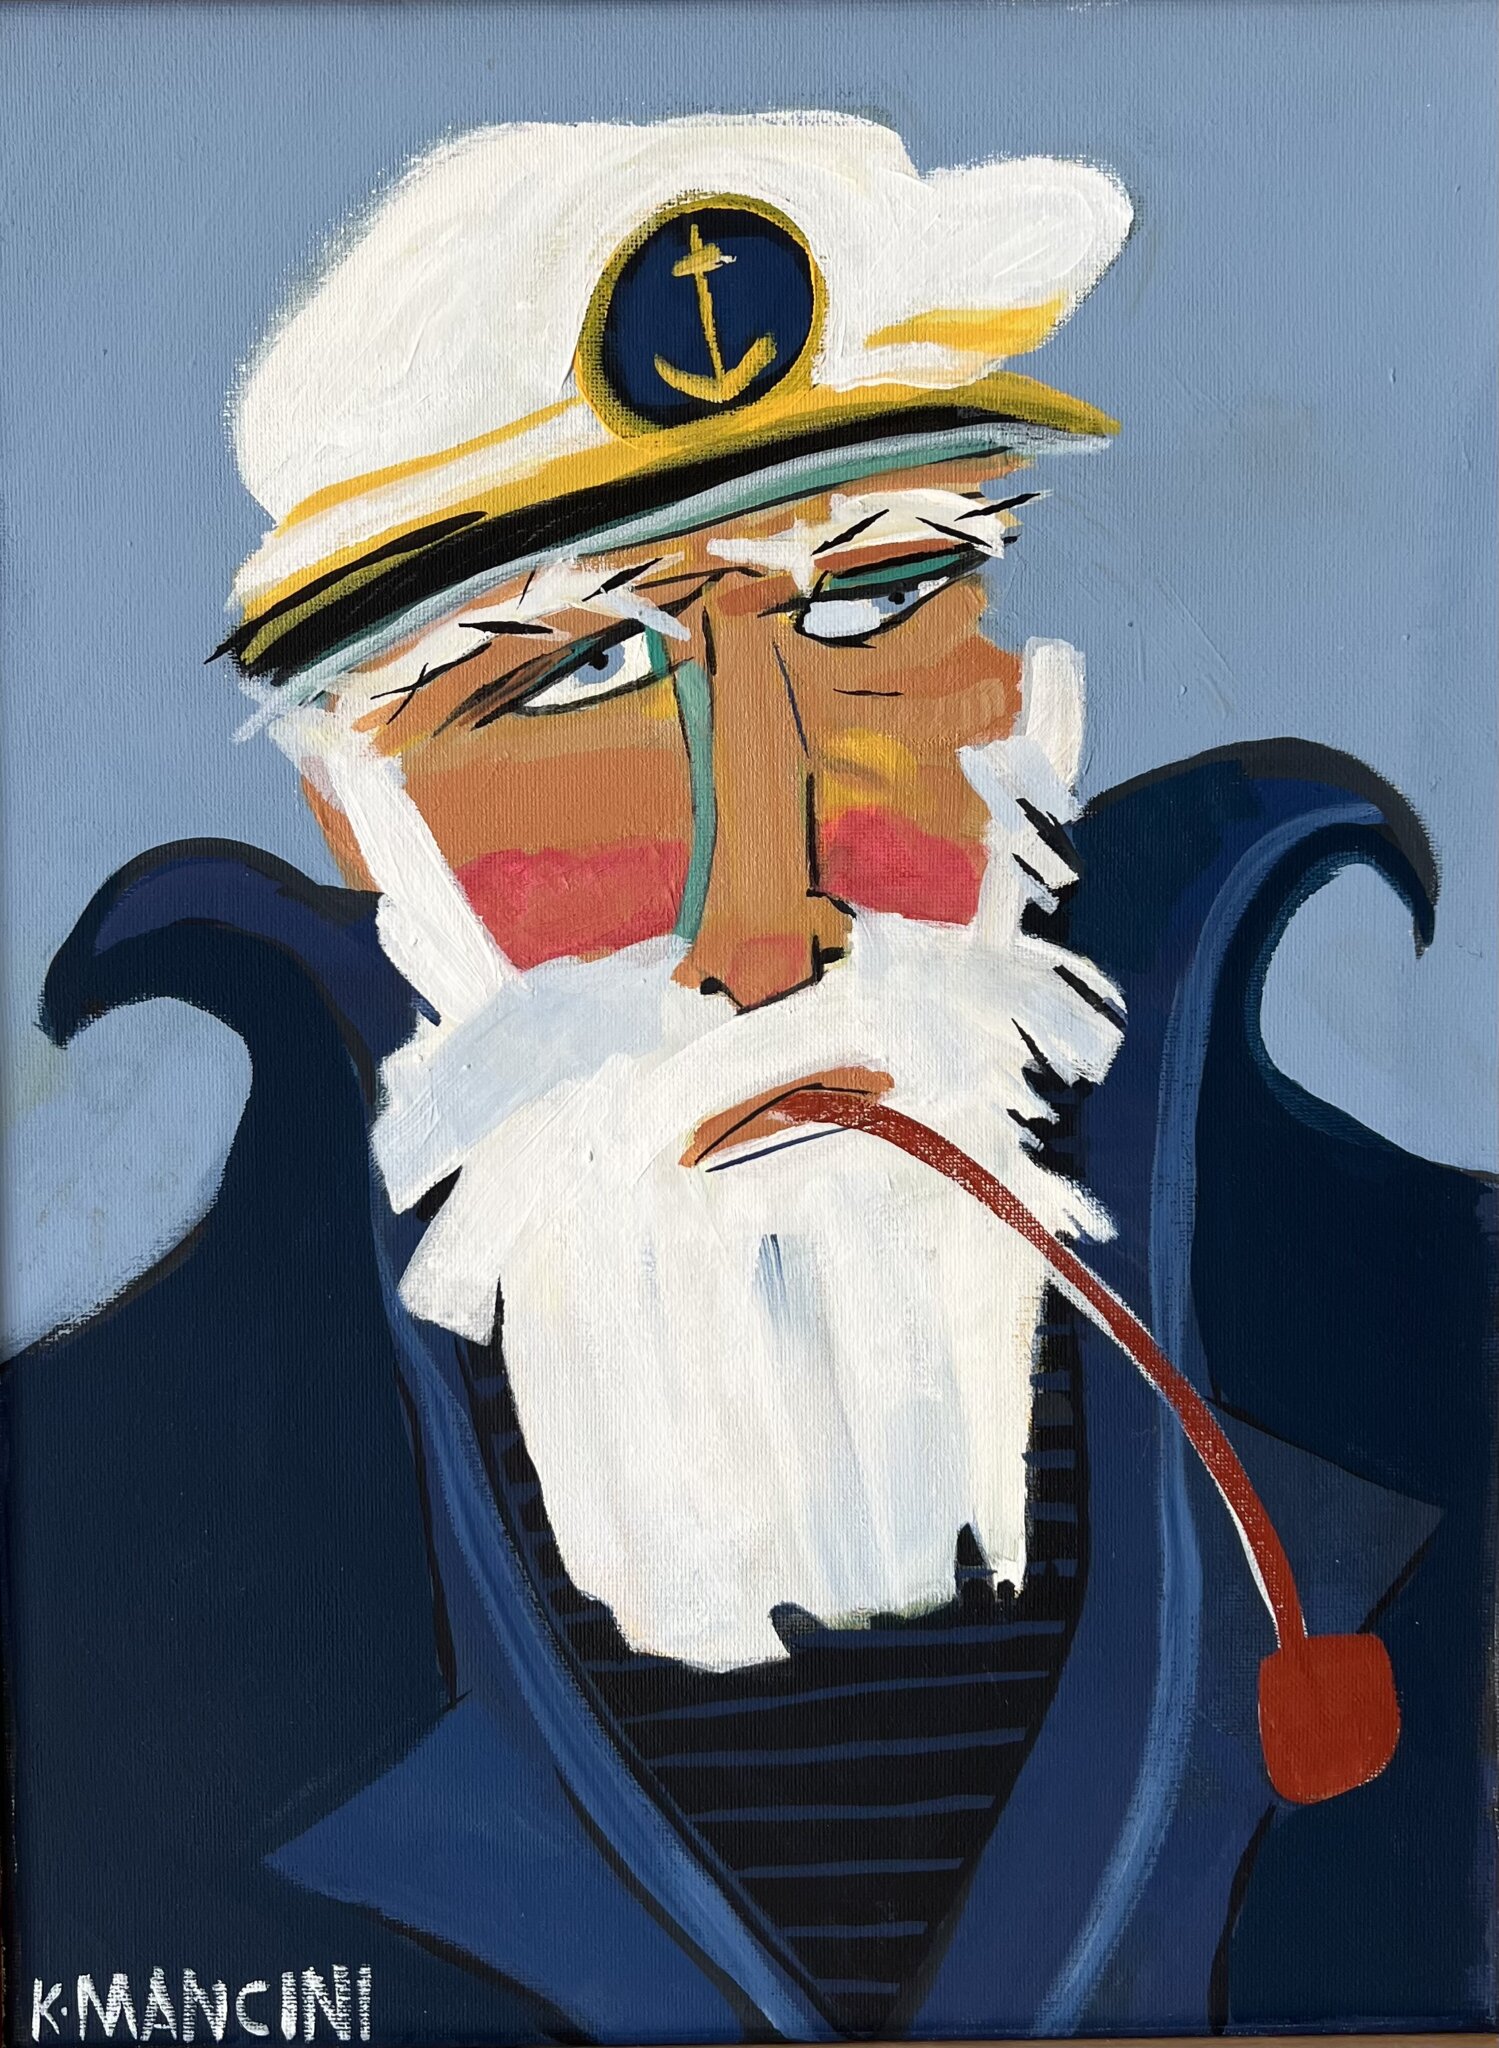 See "Sailor's Oath" and other sea-worthy paintings by Kate Mancini at Greenport Harbor Brewing Company's gallery in Greenport.